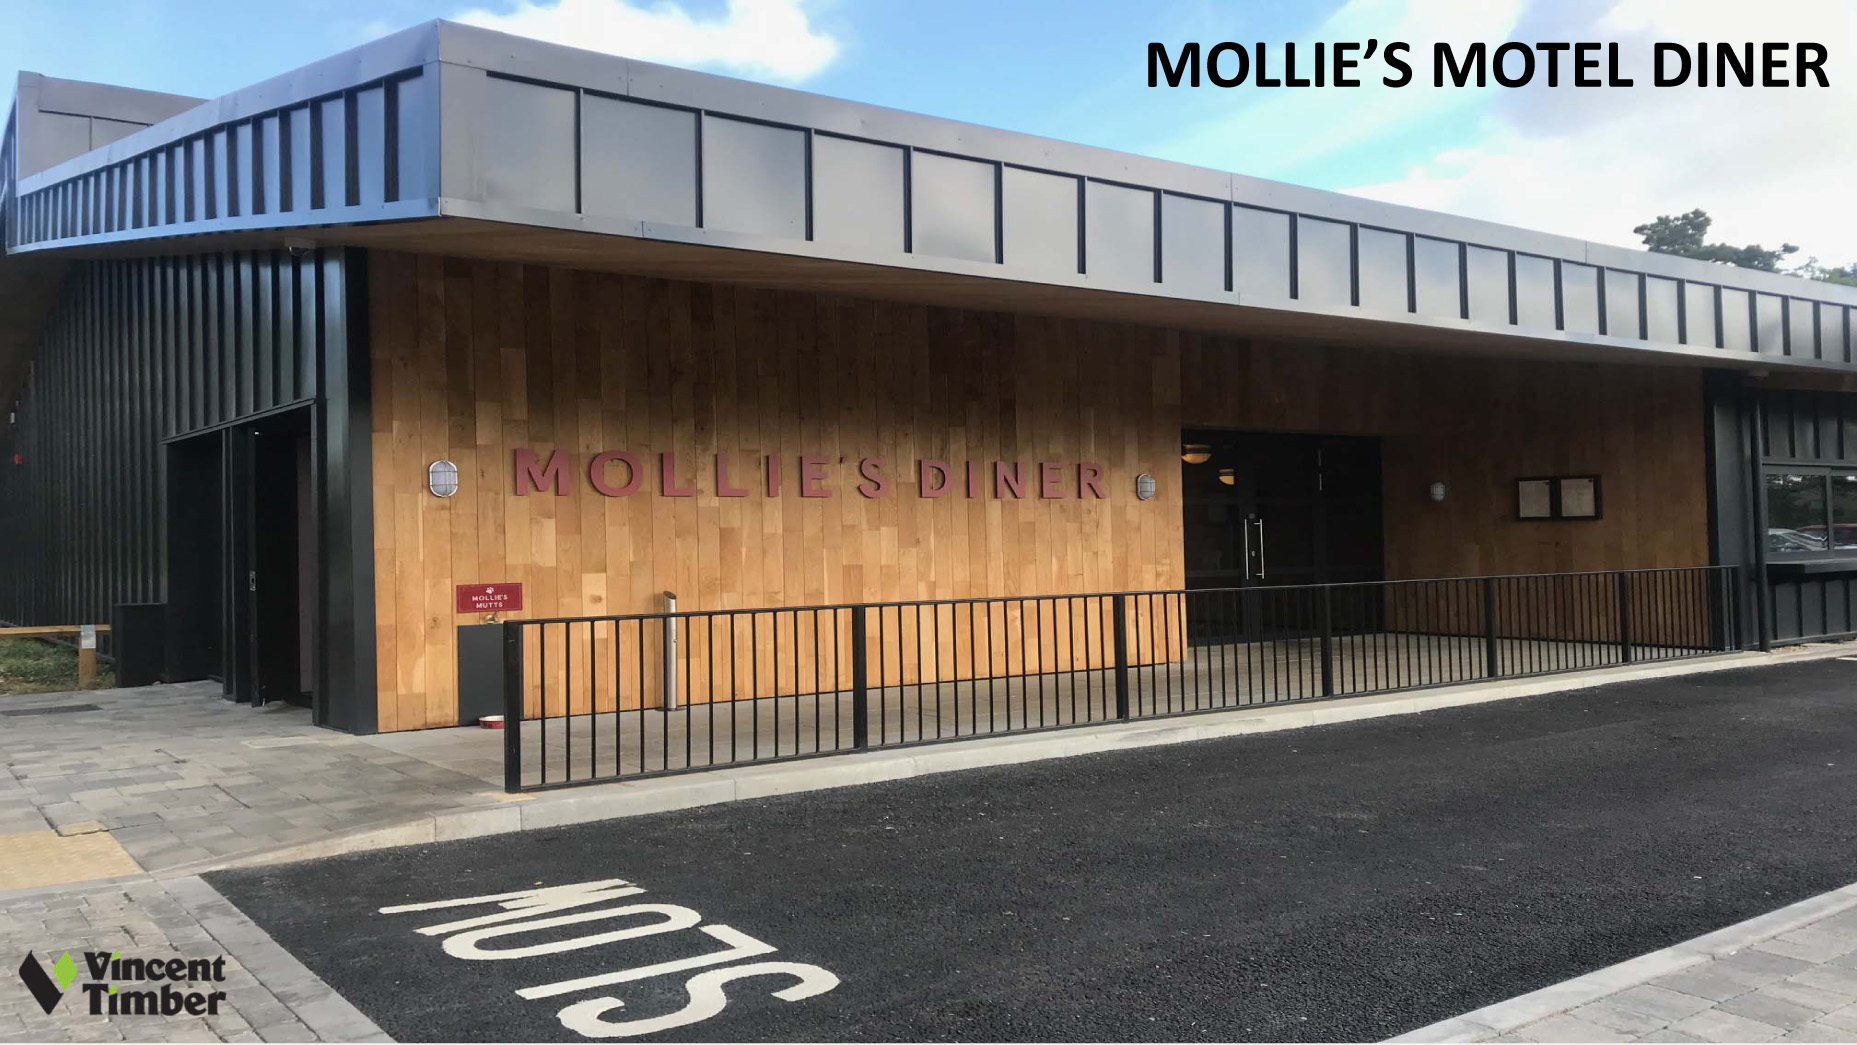 Mollies Motel and Diner